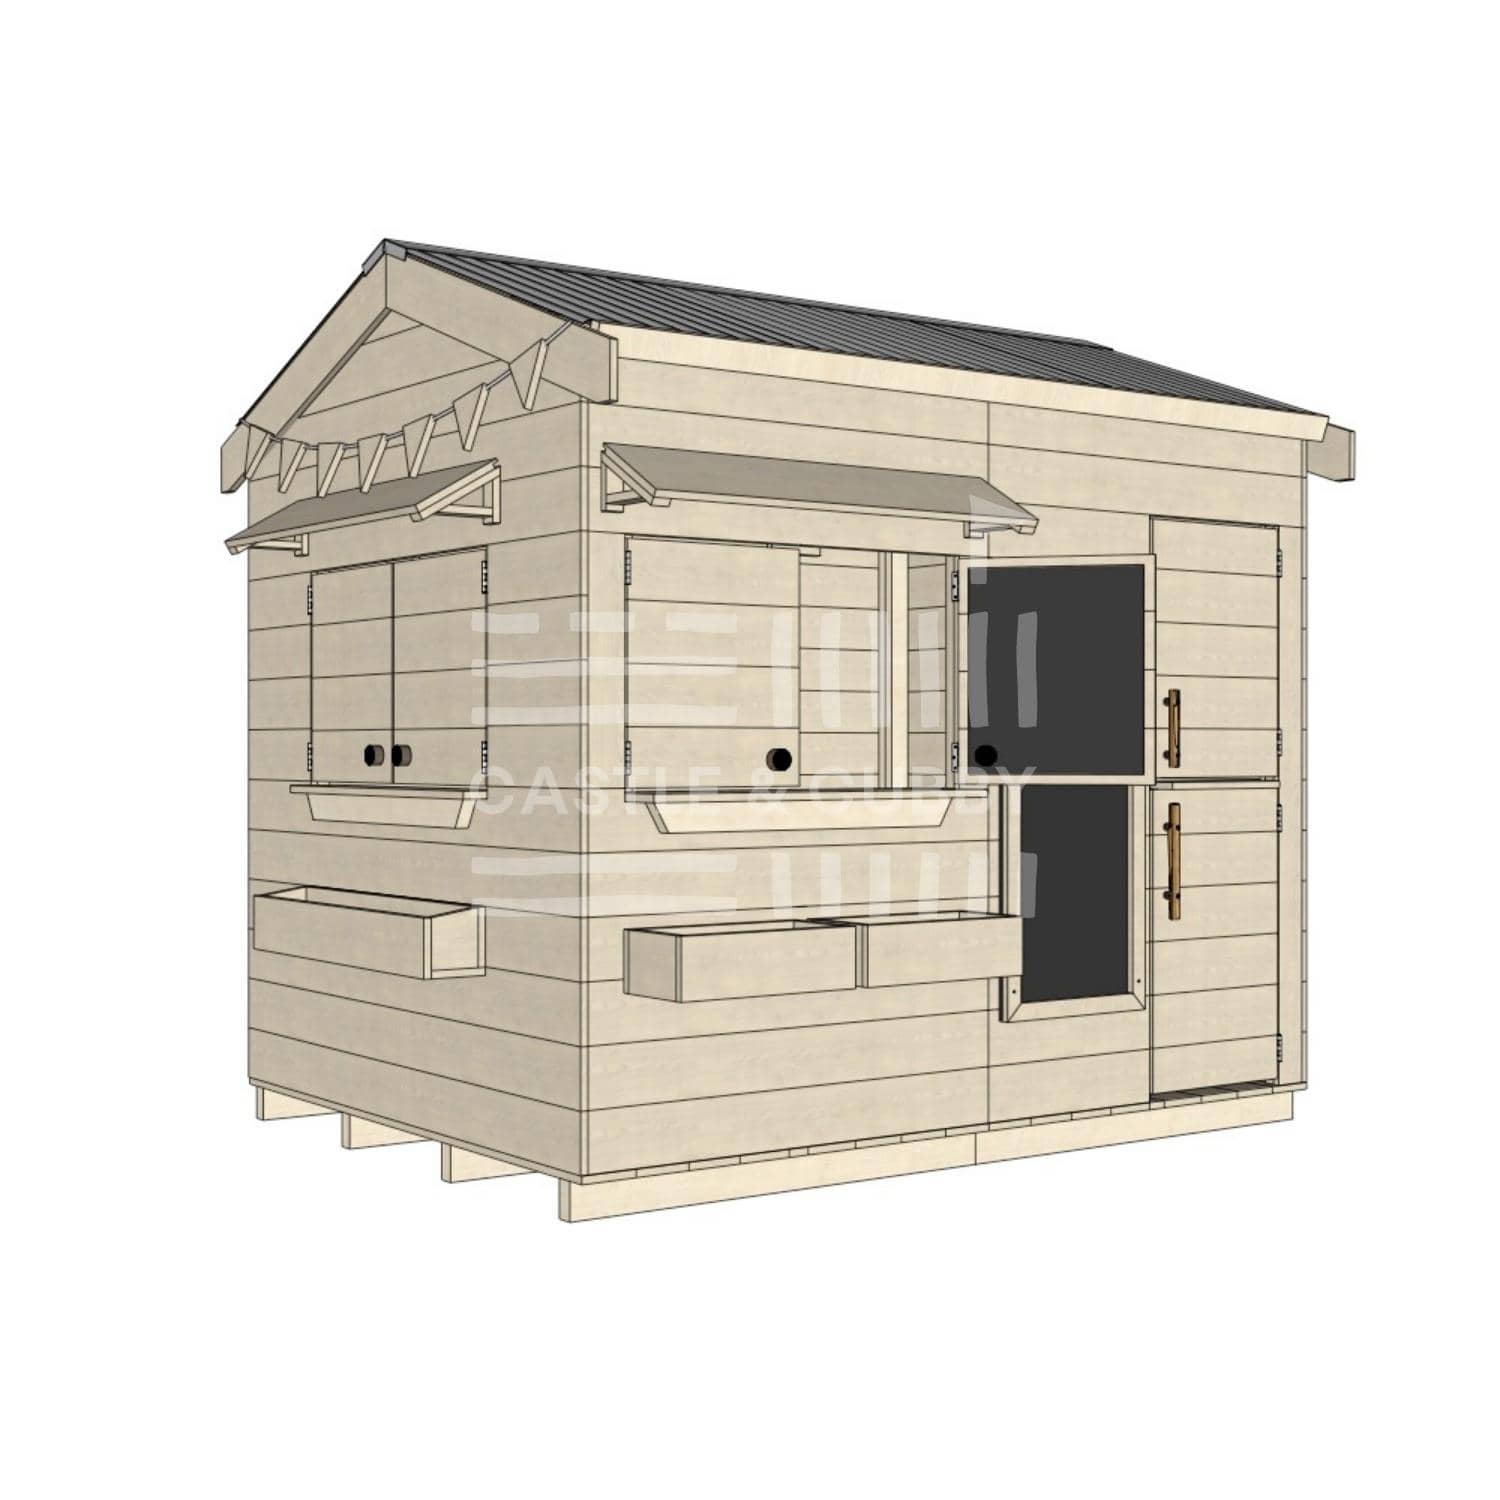 Pitched roof raw wooden extended height cubby house residential and family homes large rectangle accessories